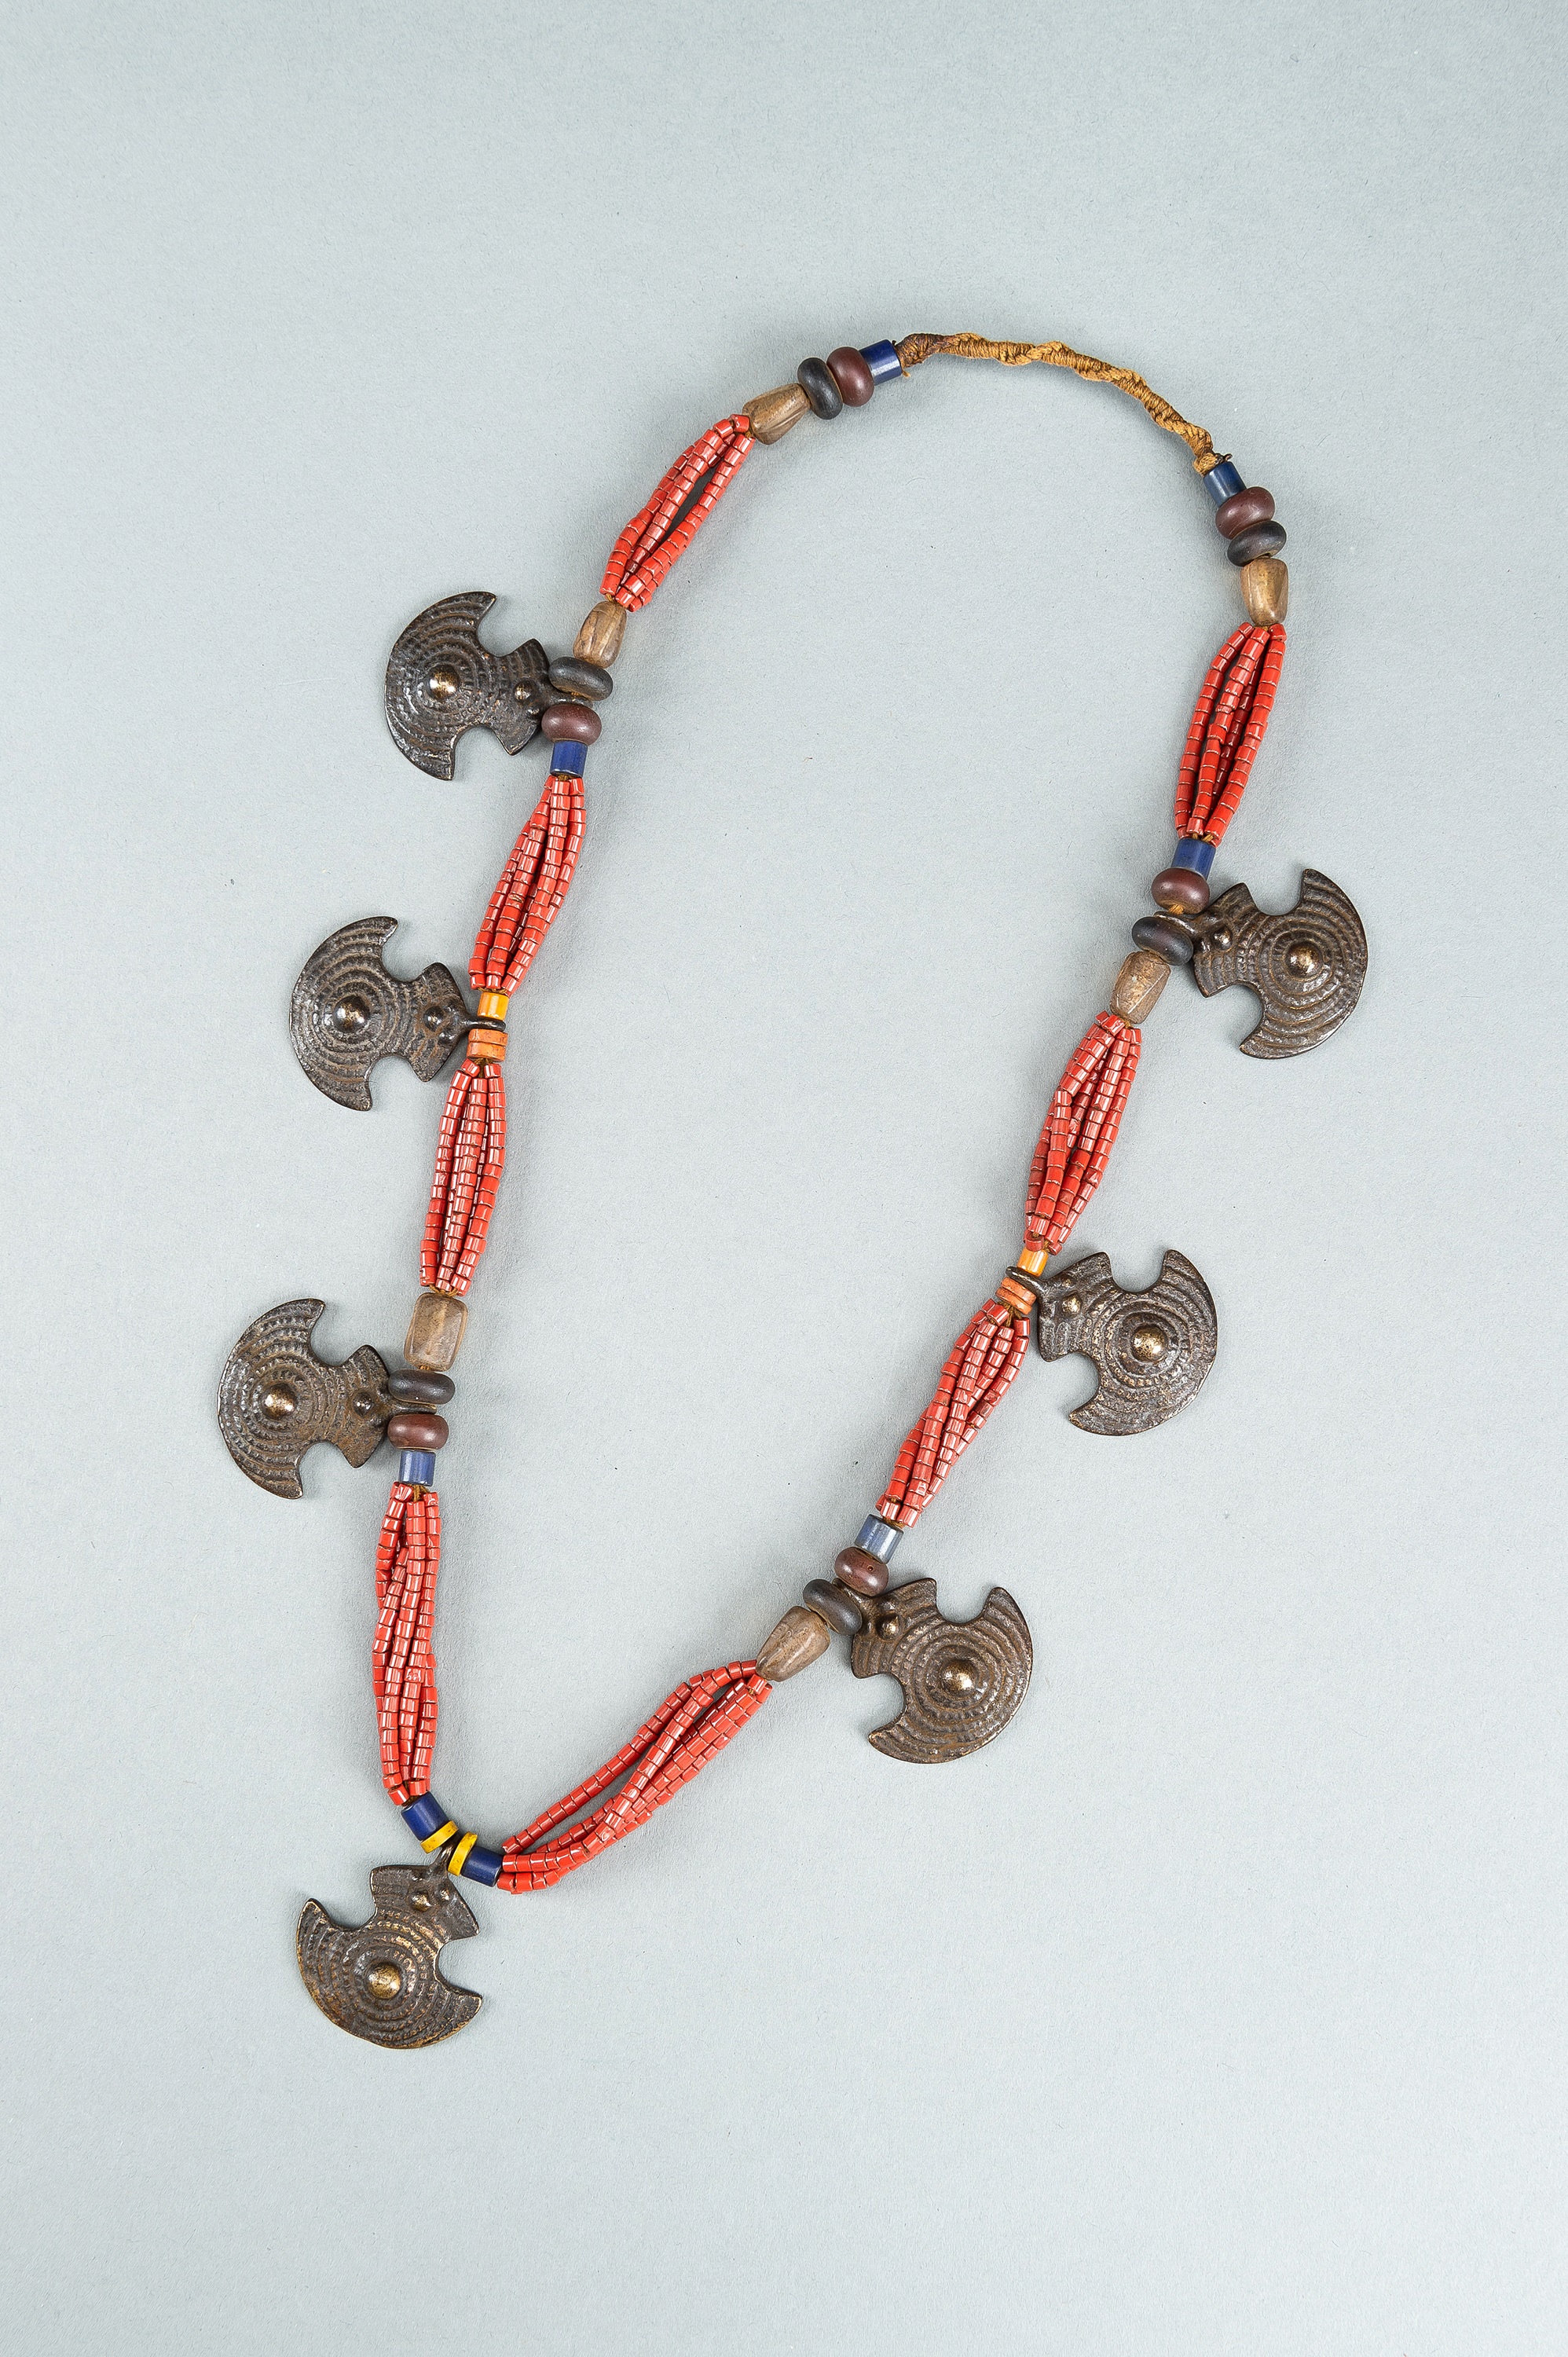 A NAGALAND MULTI-COLORED GLASS AND BRASS NECKLACE, c. 1900s - Image 11 of 11